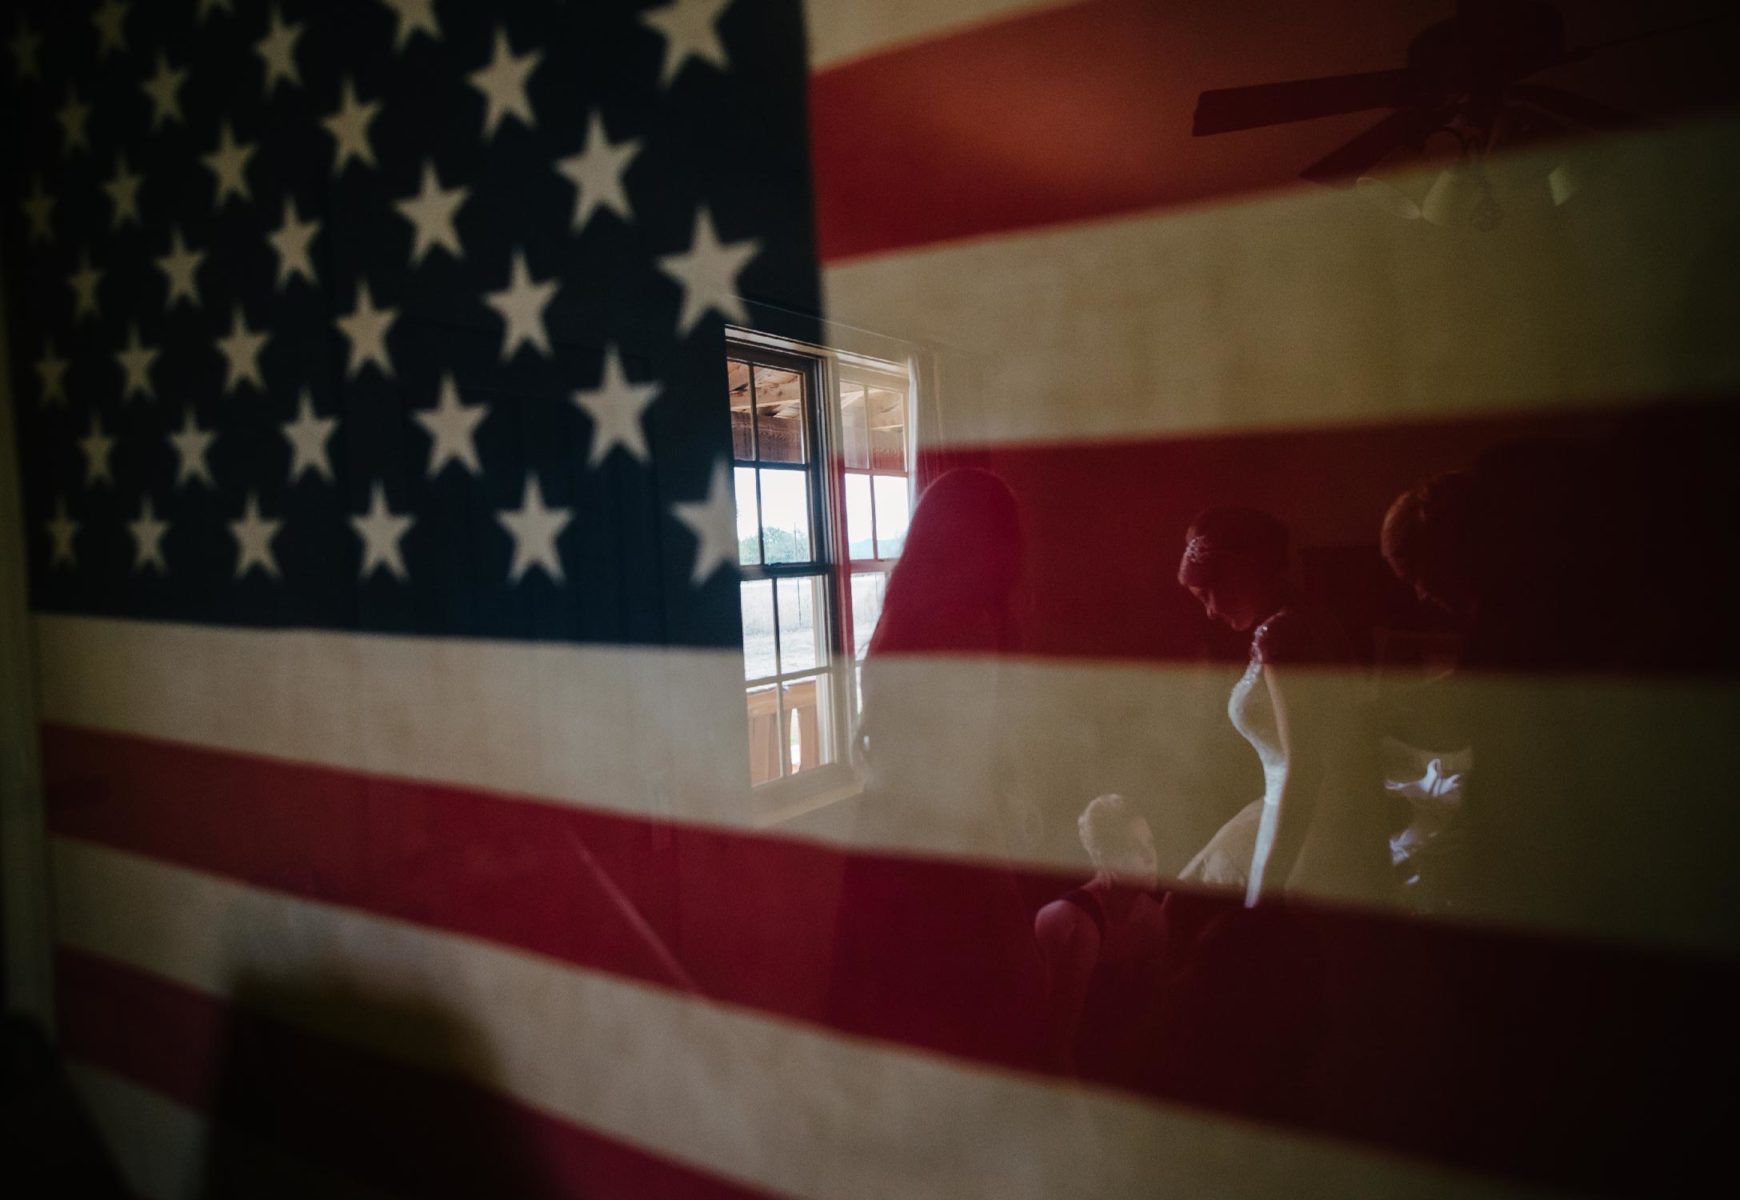 San-Antonio-wedding-photographer-Philip-Thomas captures Bride as she gets ready in reflection of an American flag. Photographed by Philip Thomas with a Leica M.